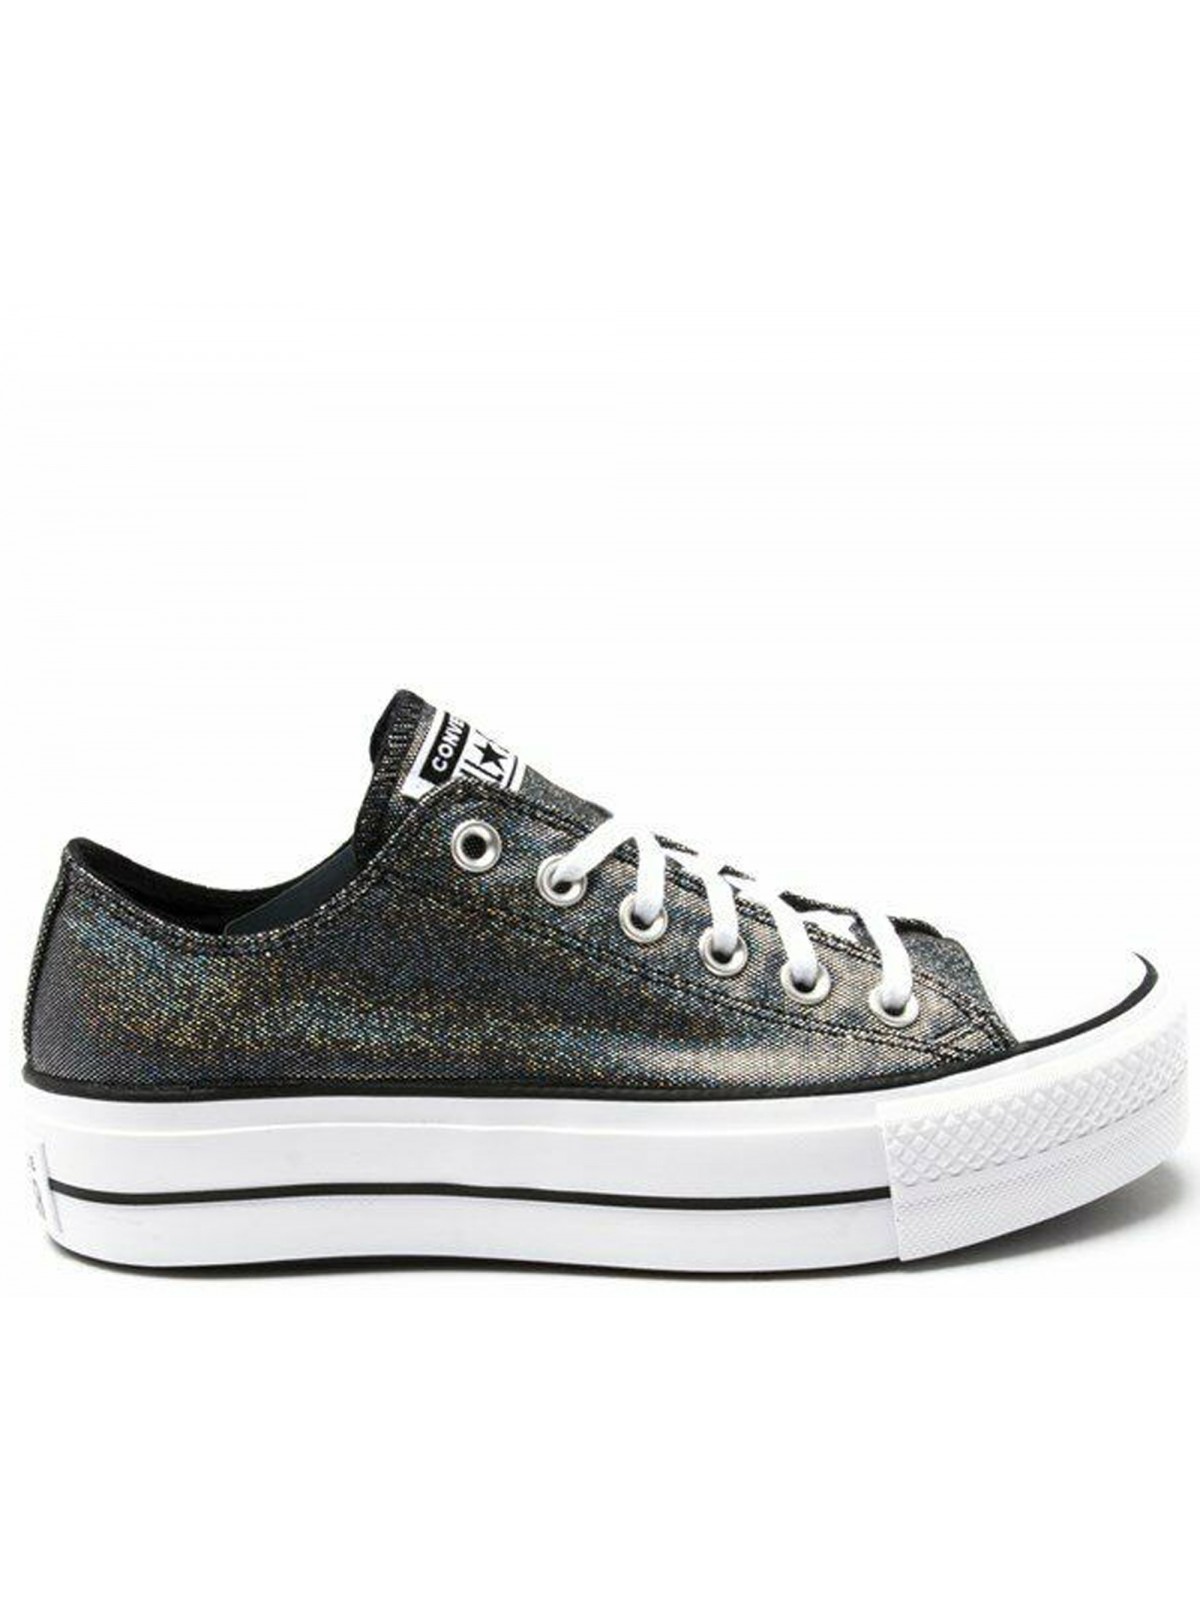 Converse Chuck Taylor all star Lift basse plateforme silver